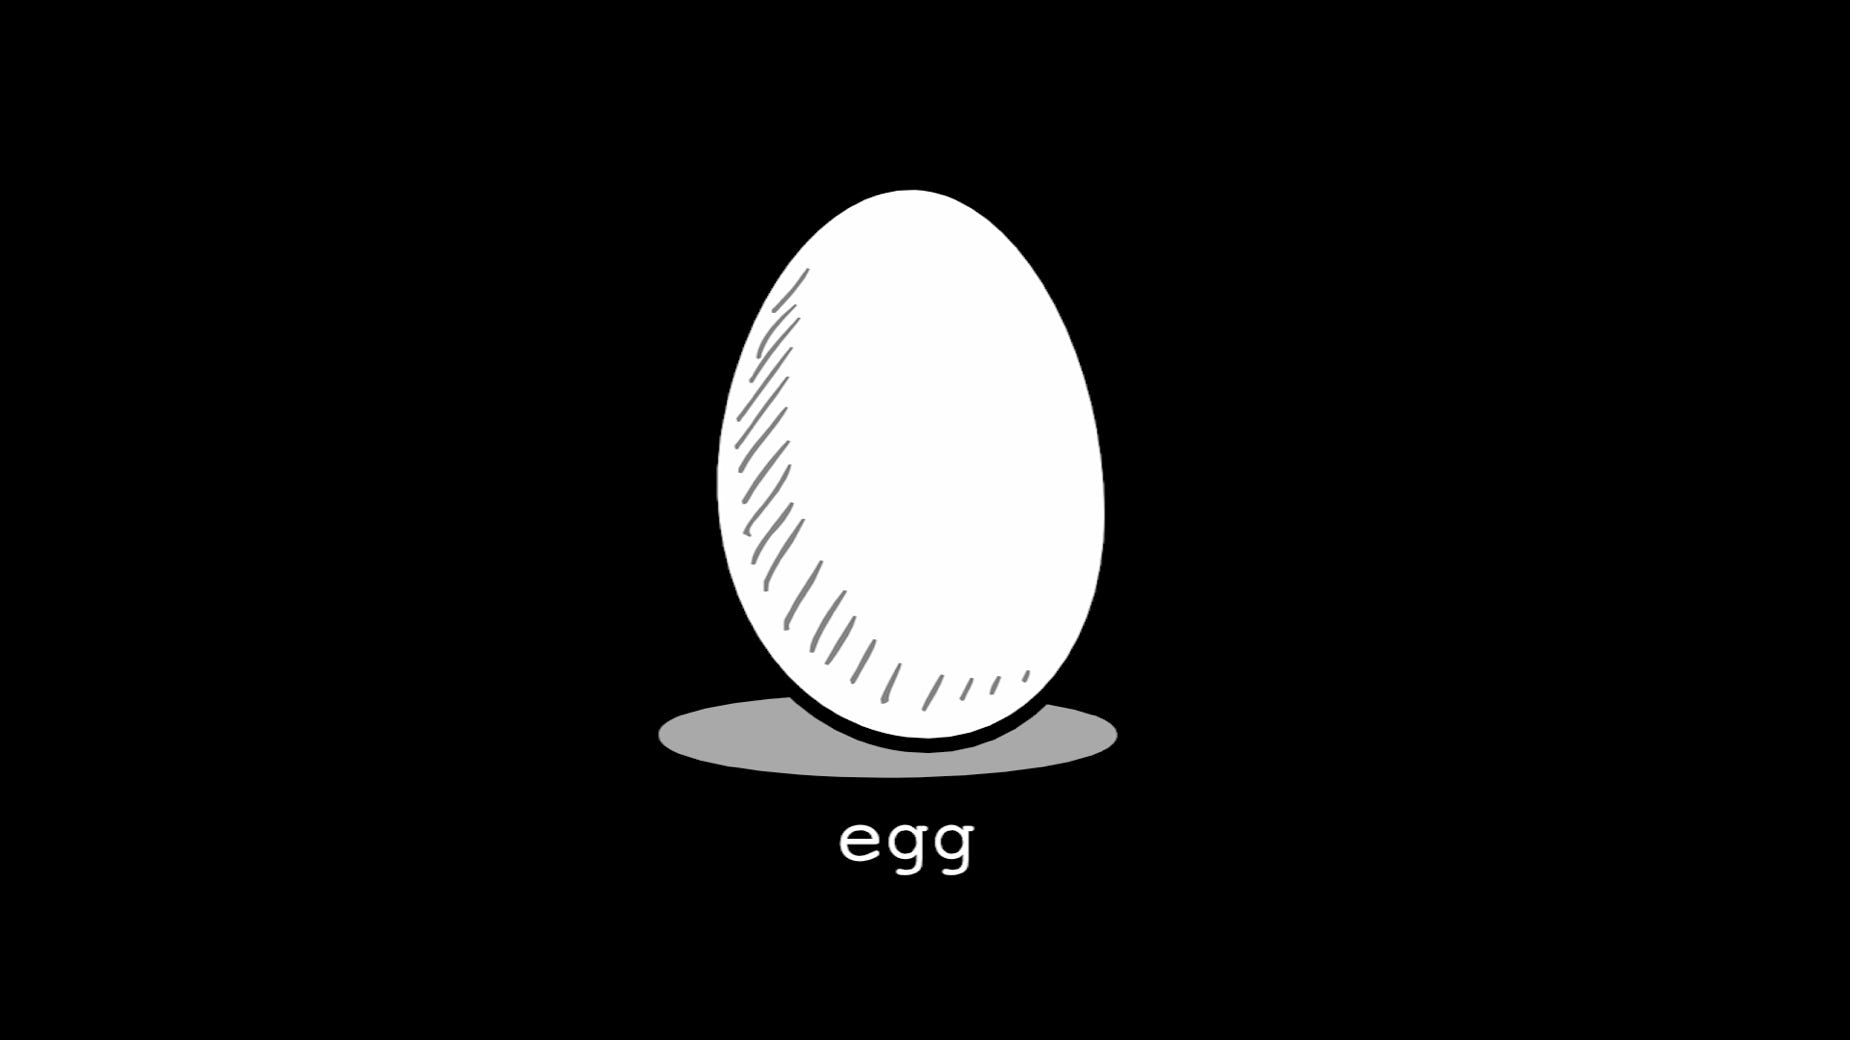 An egg, with the word "egg" written underneath, From Egg